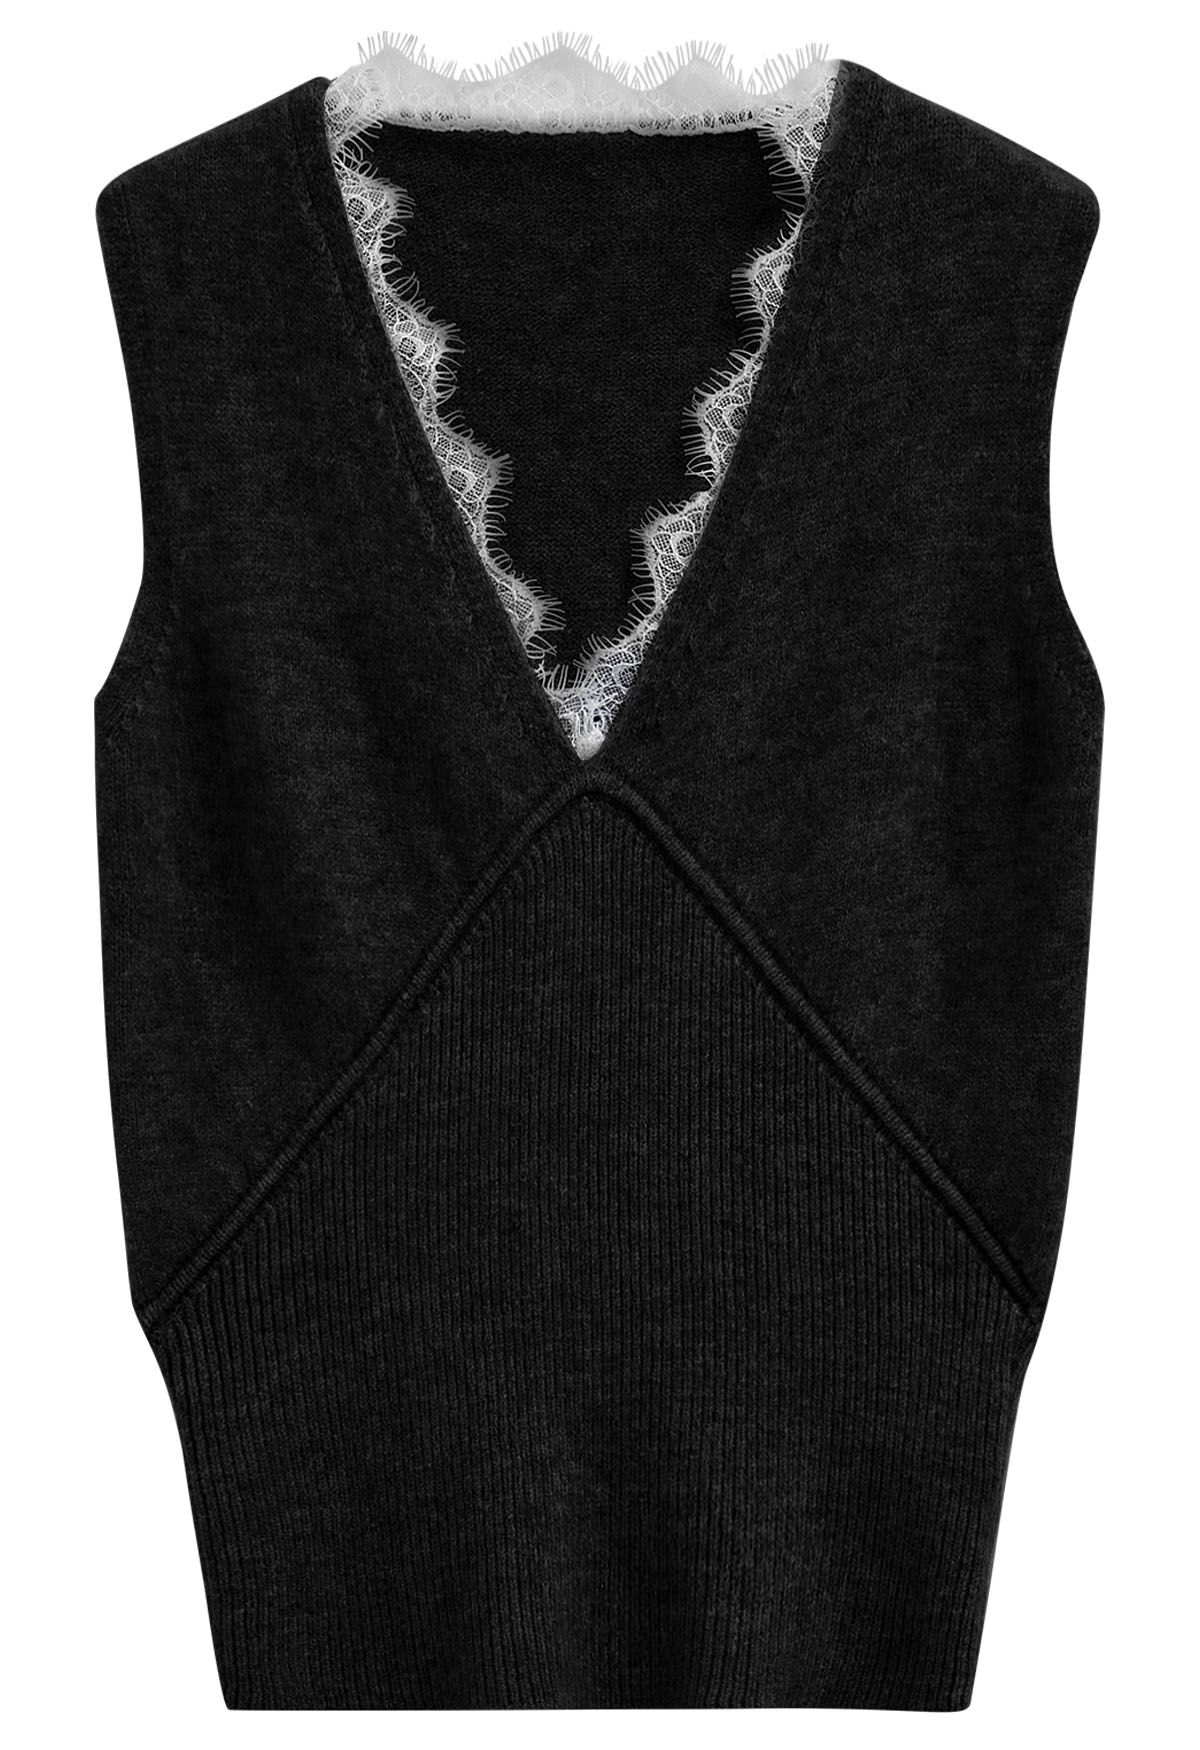 Lacy V-Neck Sleeveless Top and Cardigan Set in Black